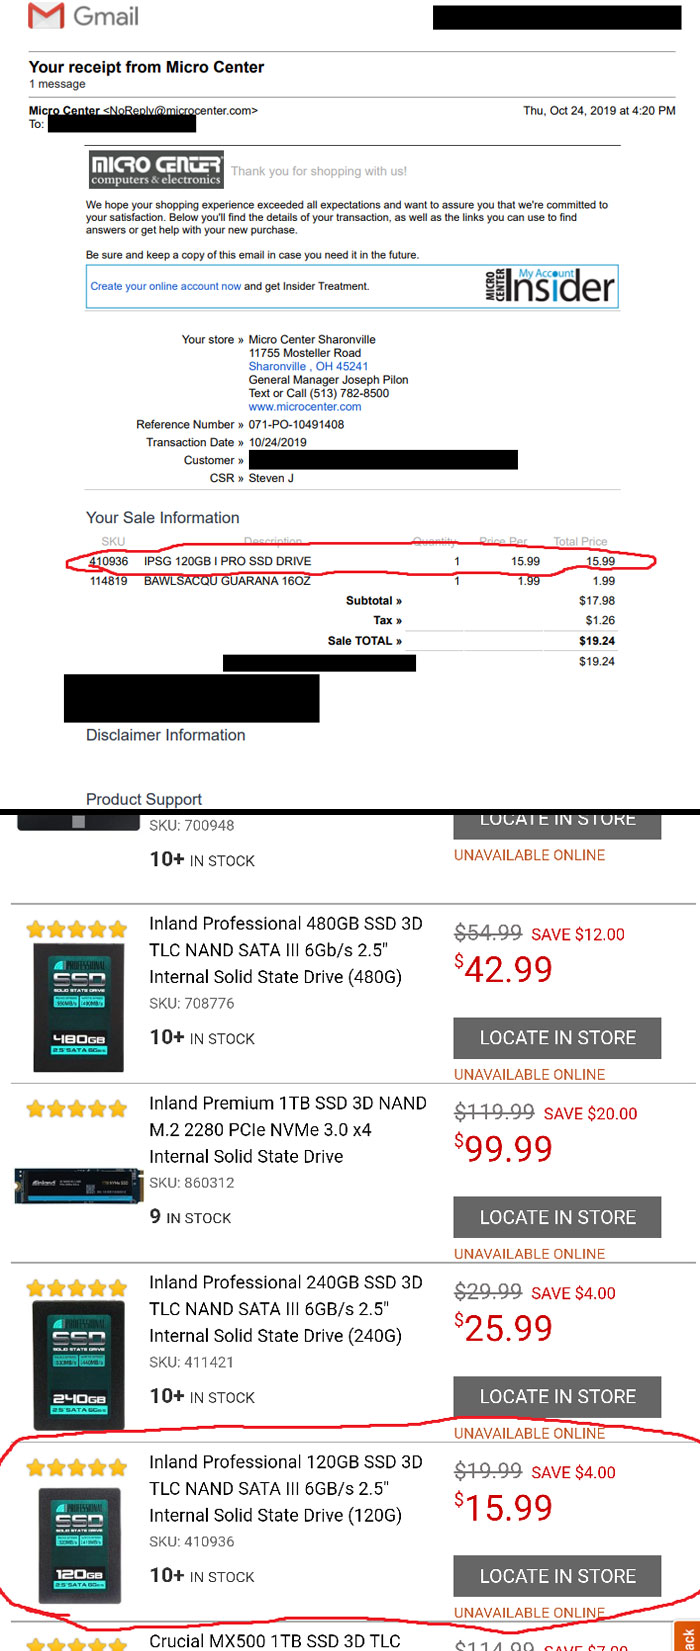 Looks Like The Micro Center Is Guilty Of The Black Friday Bs Brigade. Normal Pricing At The End Of October vs. Black Friday Pricing